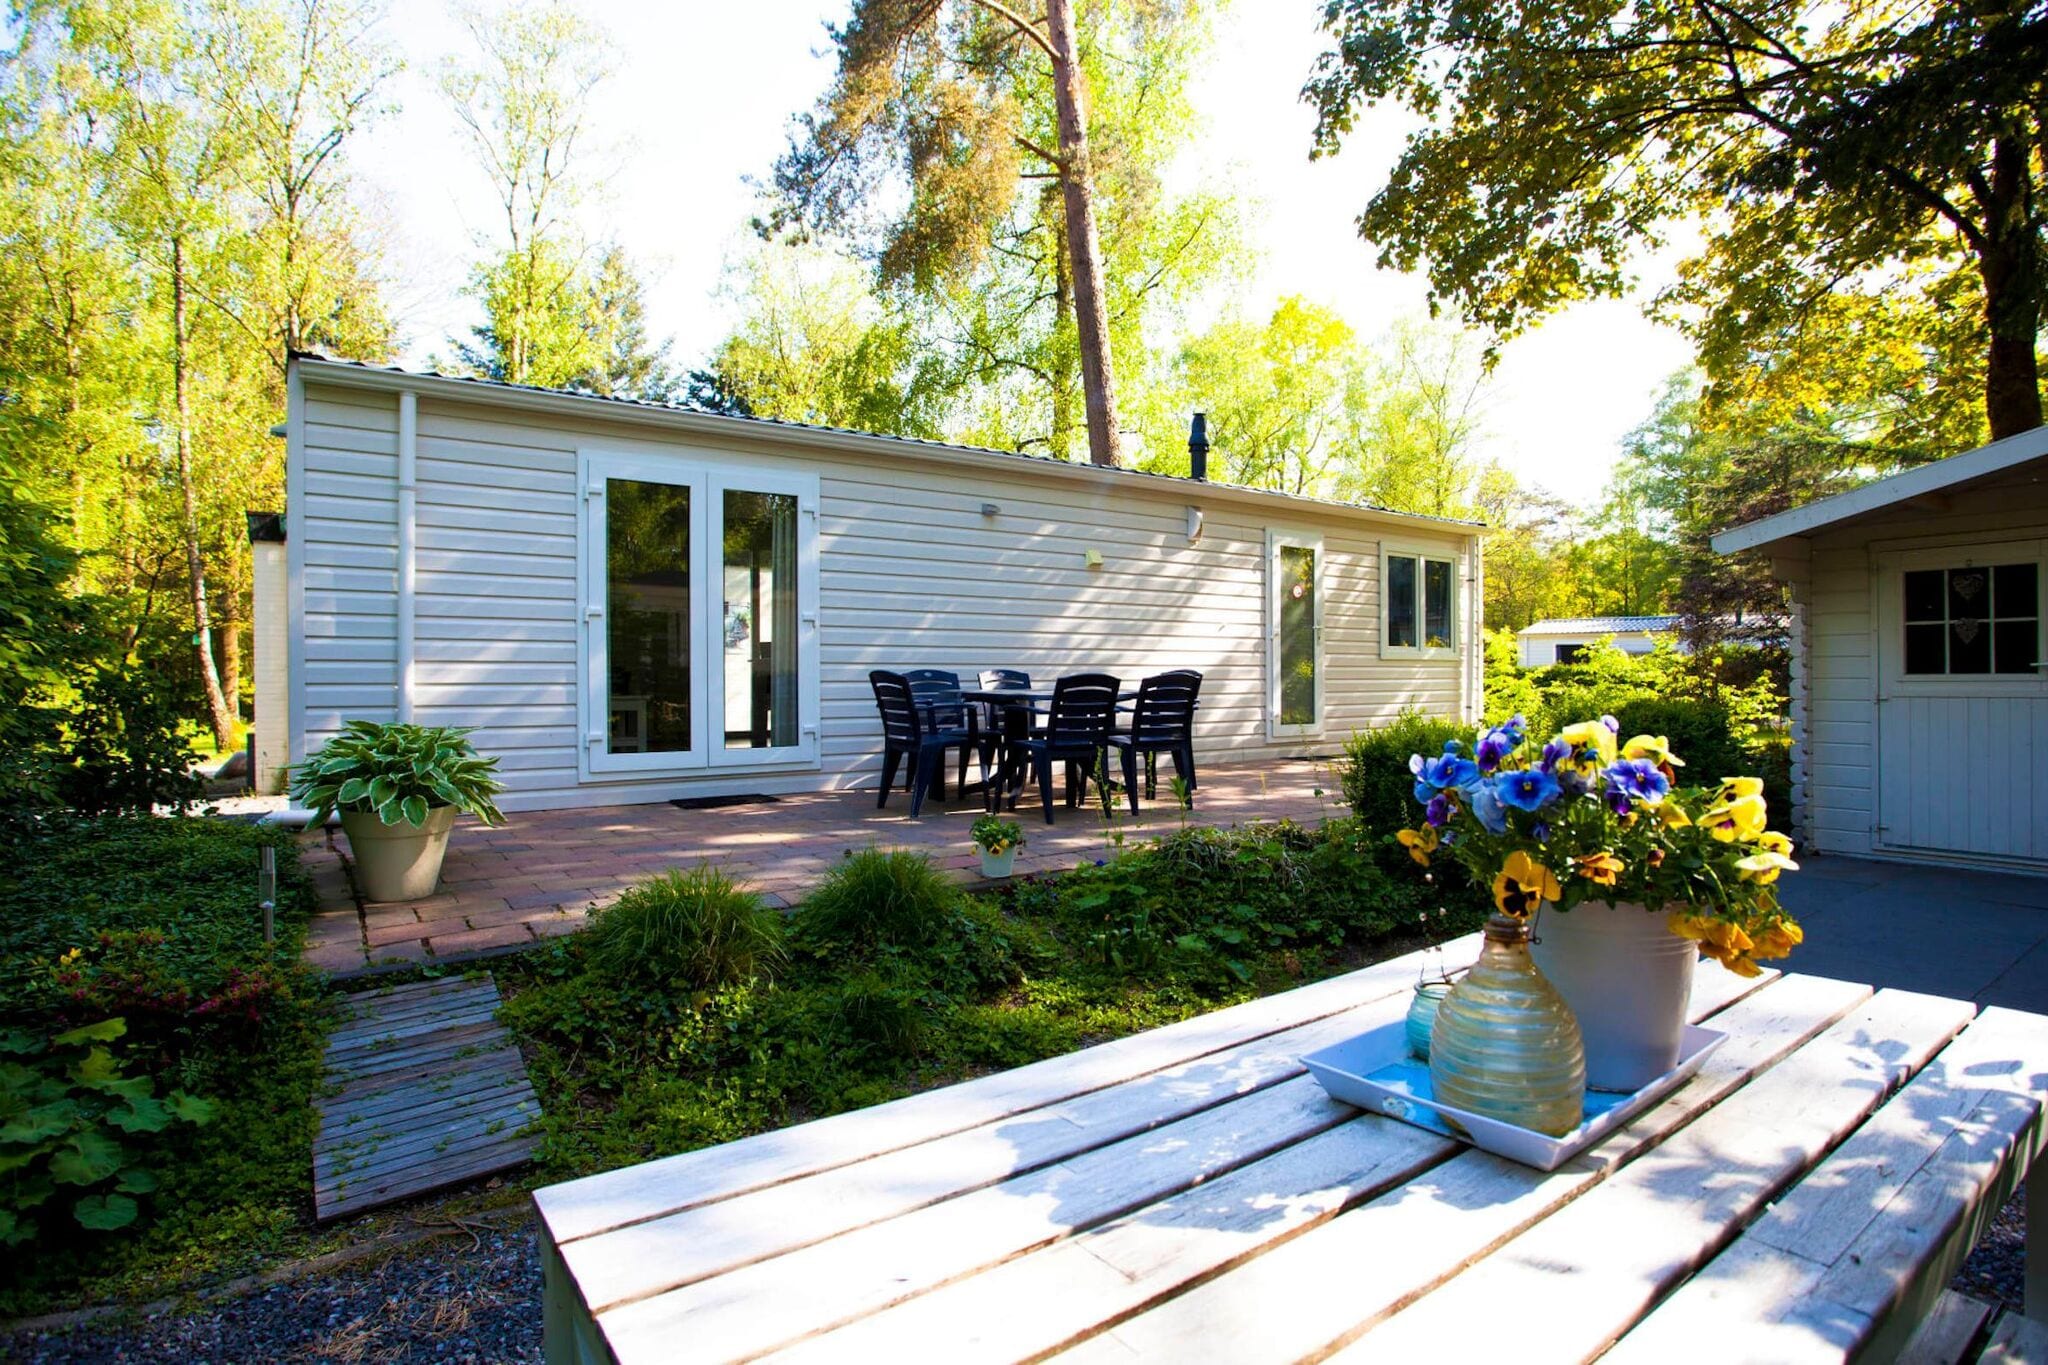 Well-kept chalet in a holiday park, adjacent to the Hoge Veluwe National Park